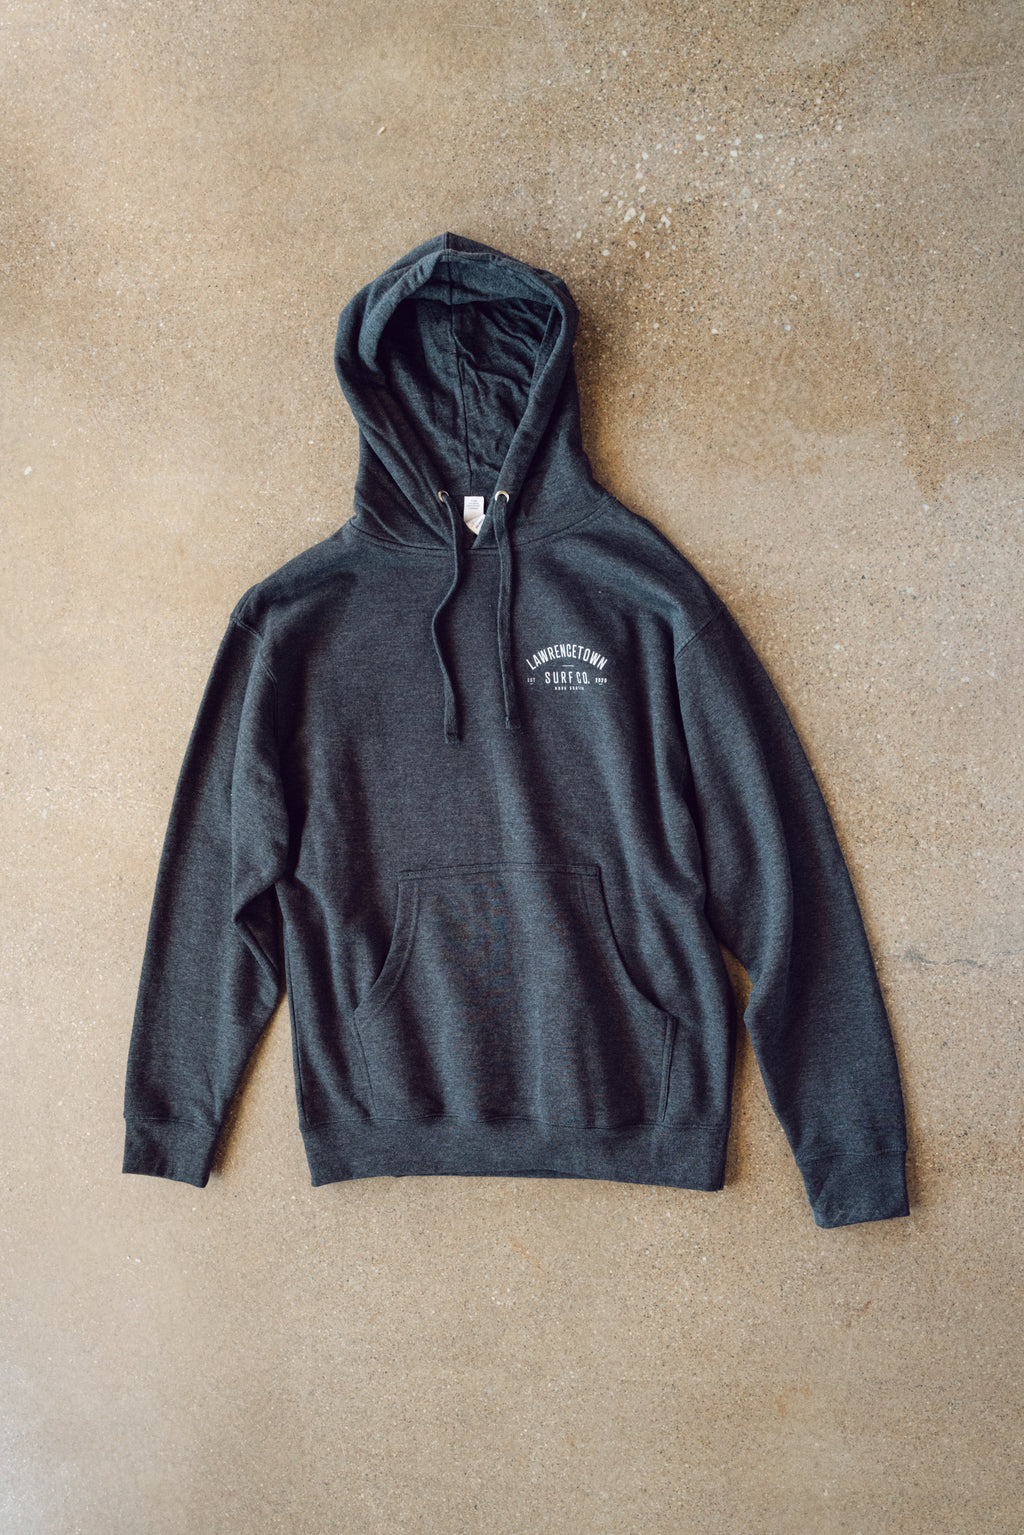 Midweight Hoodie - Charcoal Grey / White